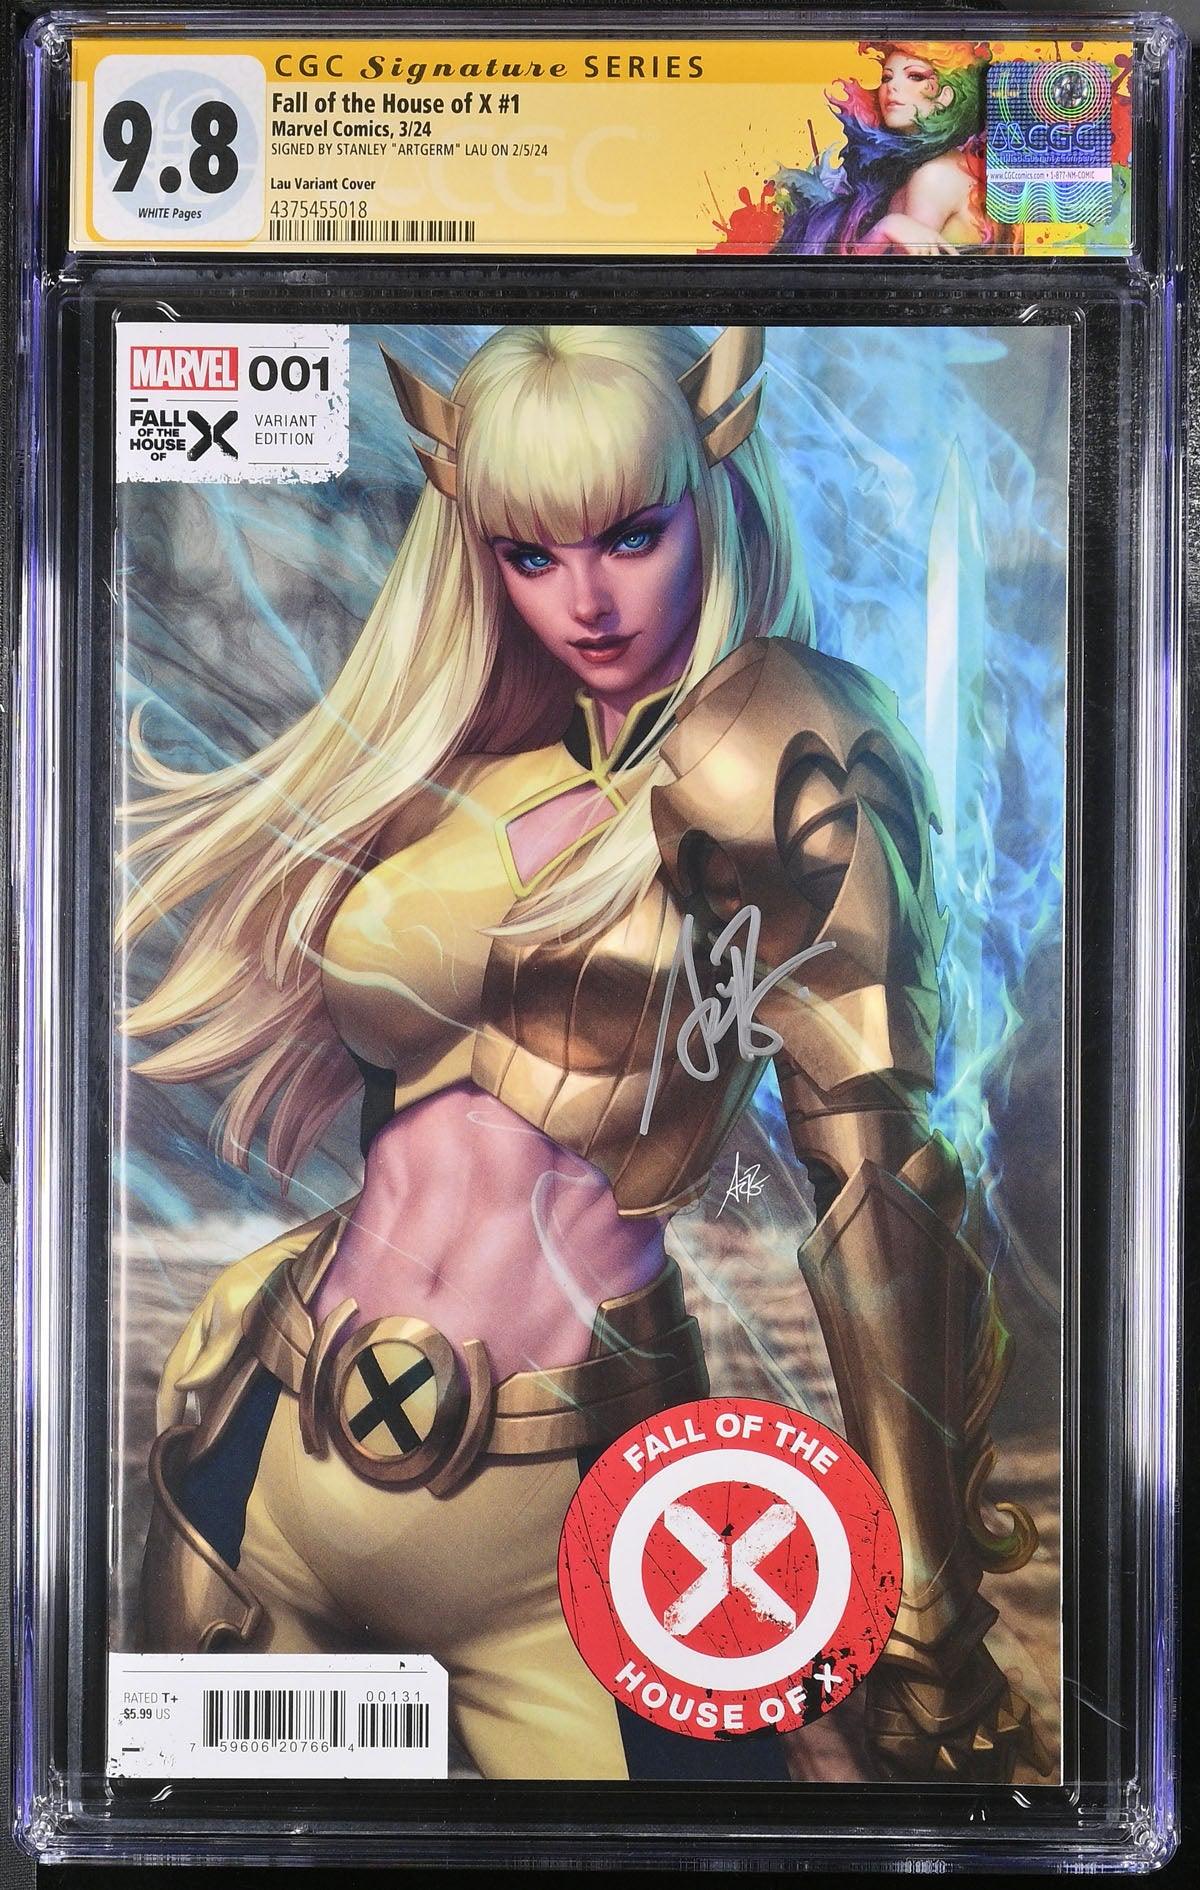 CGC FALL OF THE HOUSE OF X #1 LAU VARIANT (9.8) SIGNATURE SERIES - SIGNED BY STANLEY "ARTGERM" - Kings Comics